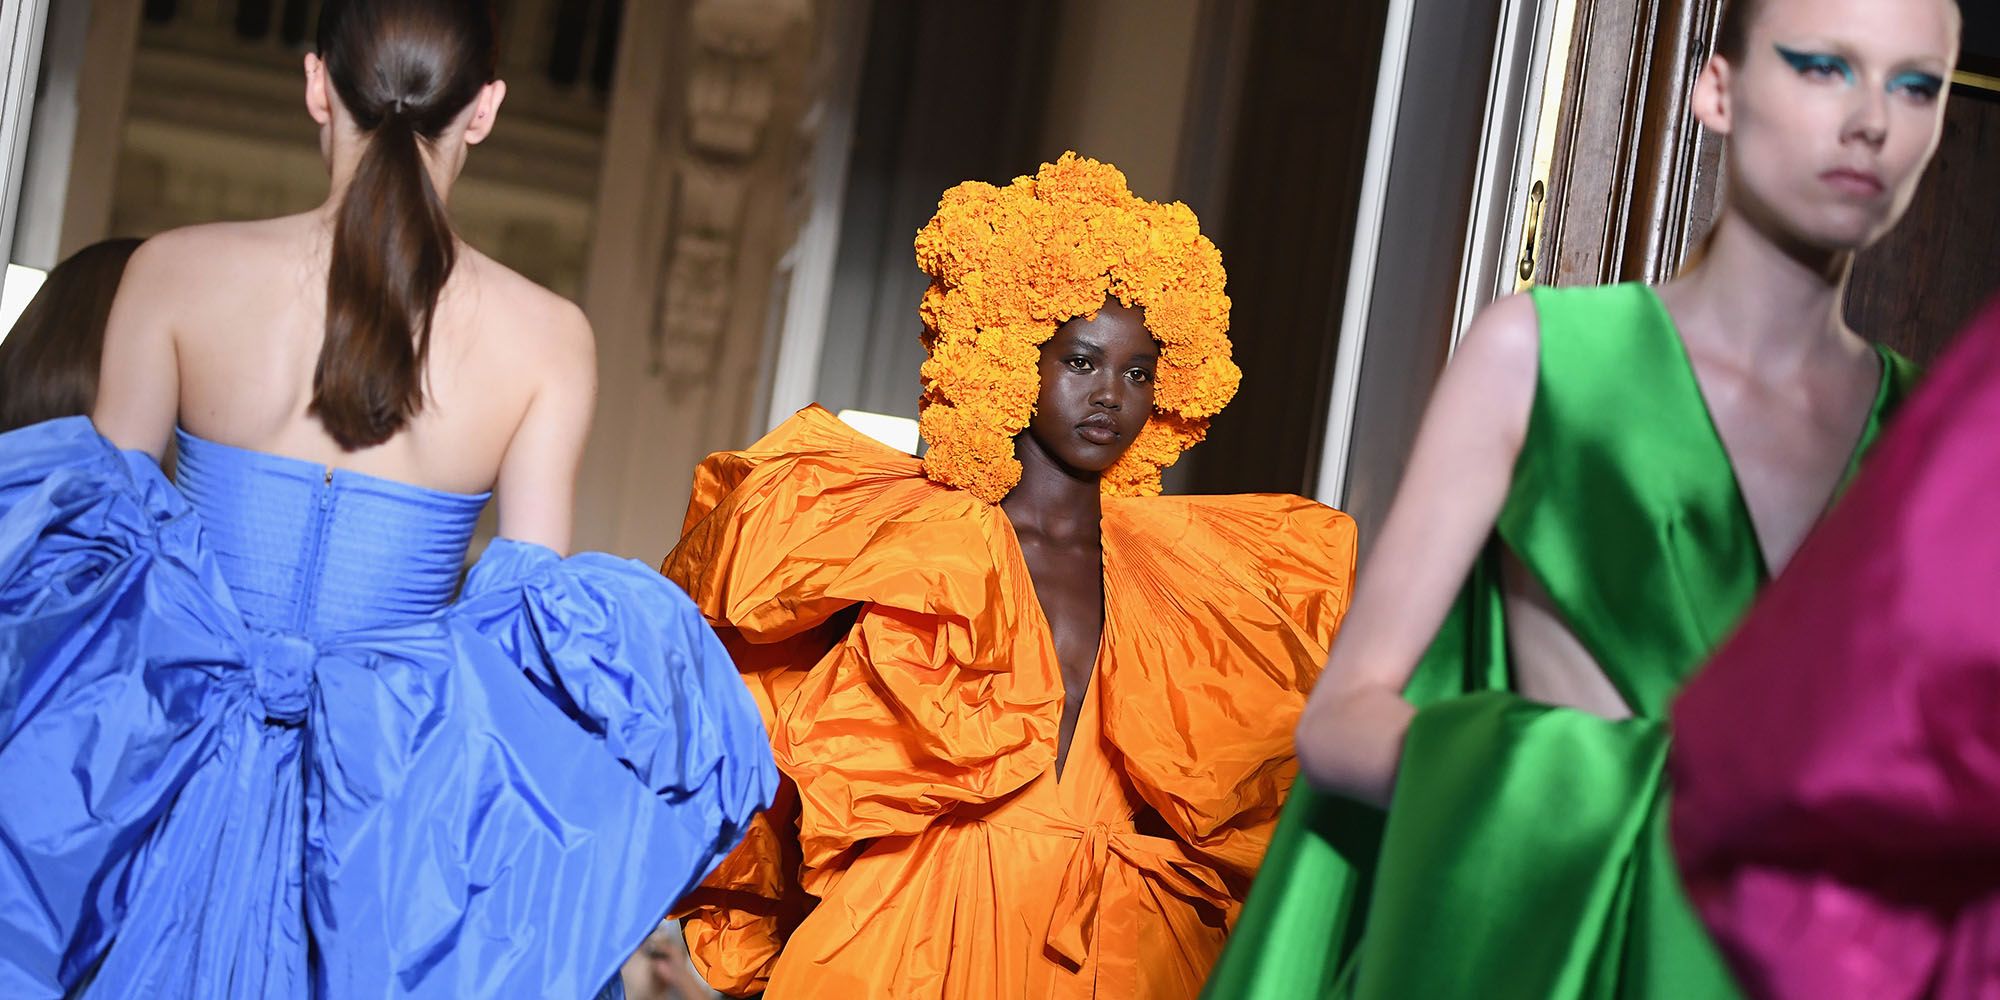 In 2019, haute couture is thriving